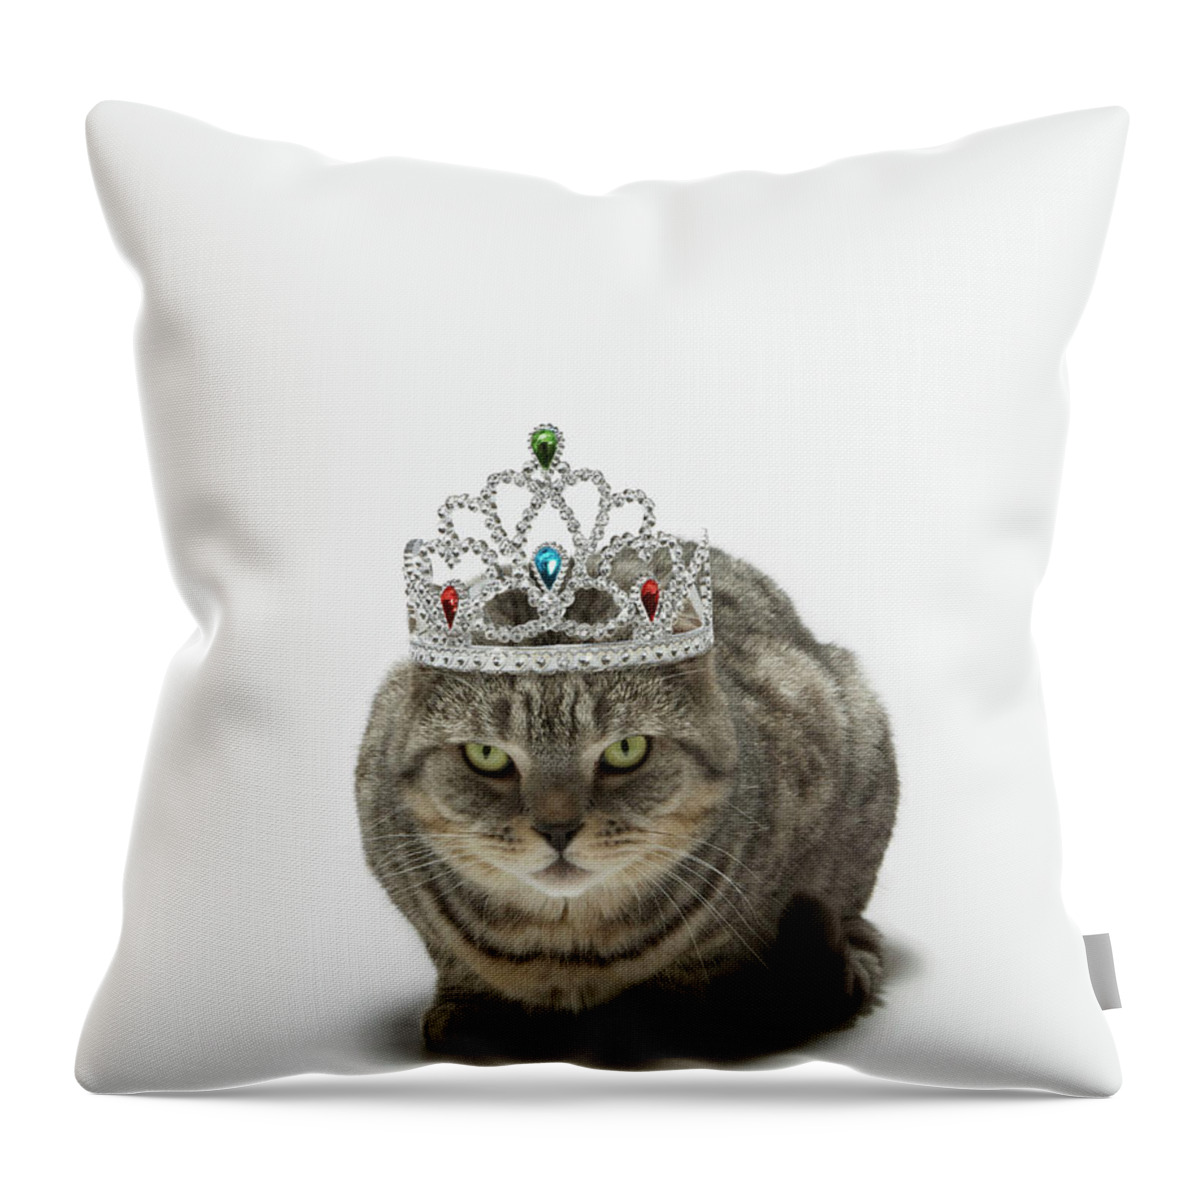 Crown Throw Pillow featuring the photograph Cat Wearing A Tiara by Tim Macpherson